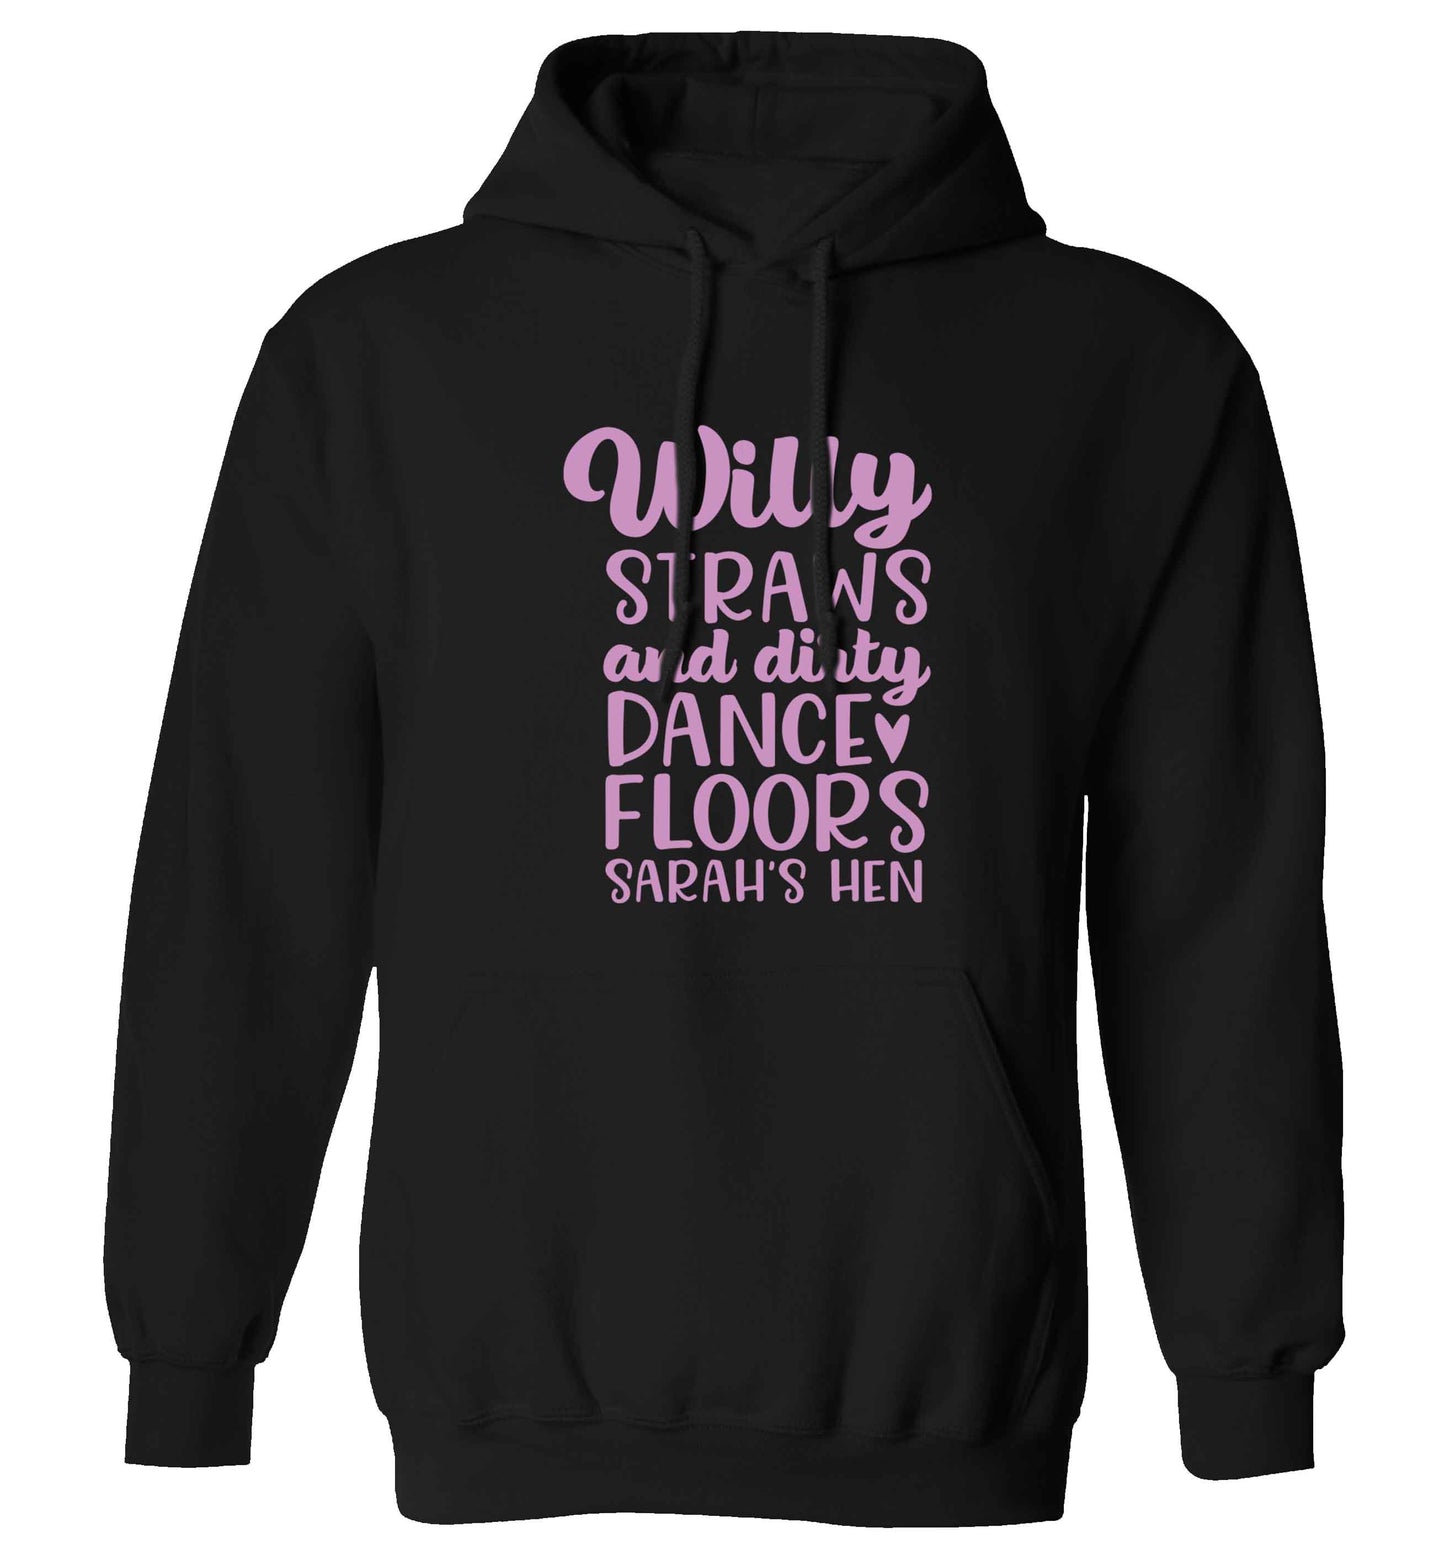 Willy straws and dirty dance floors adults unisex black hoodie 2XL